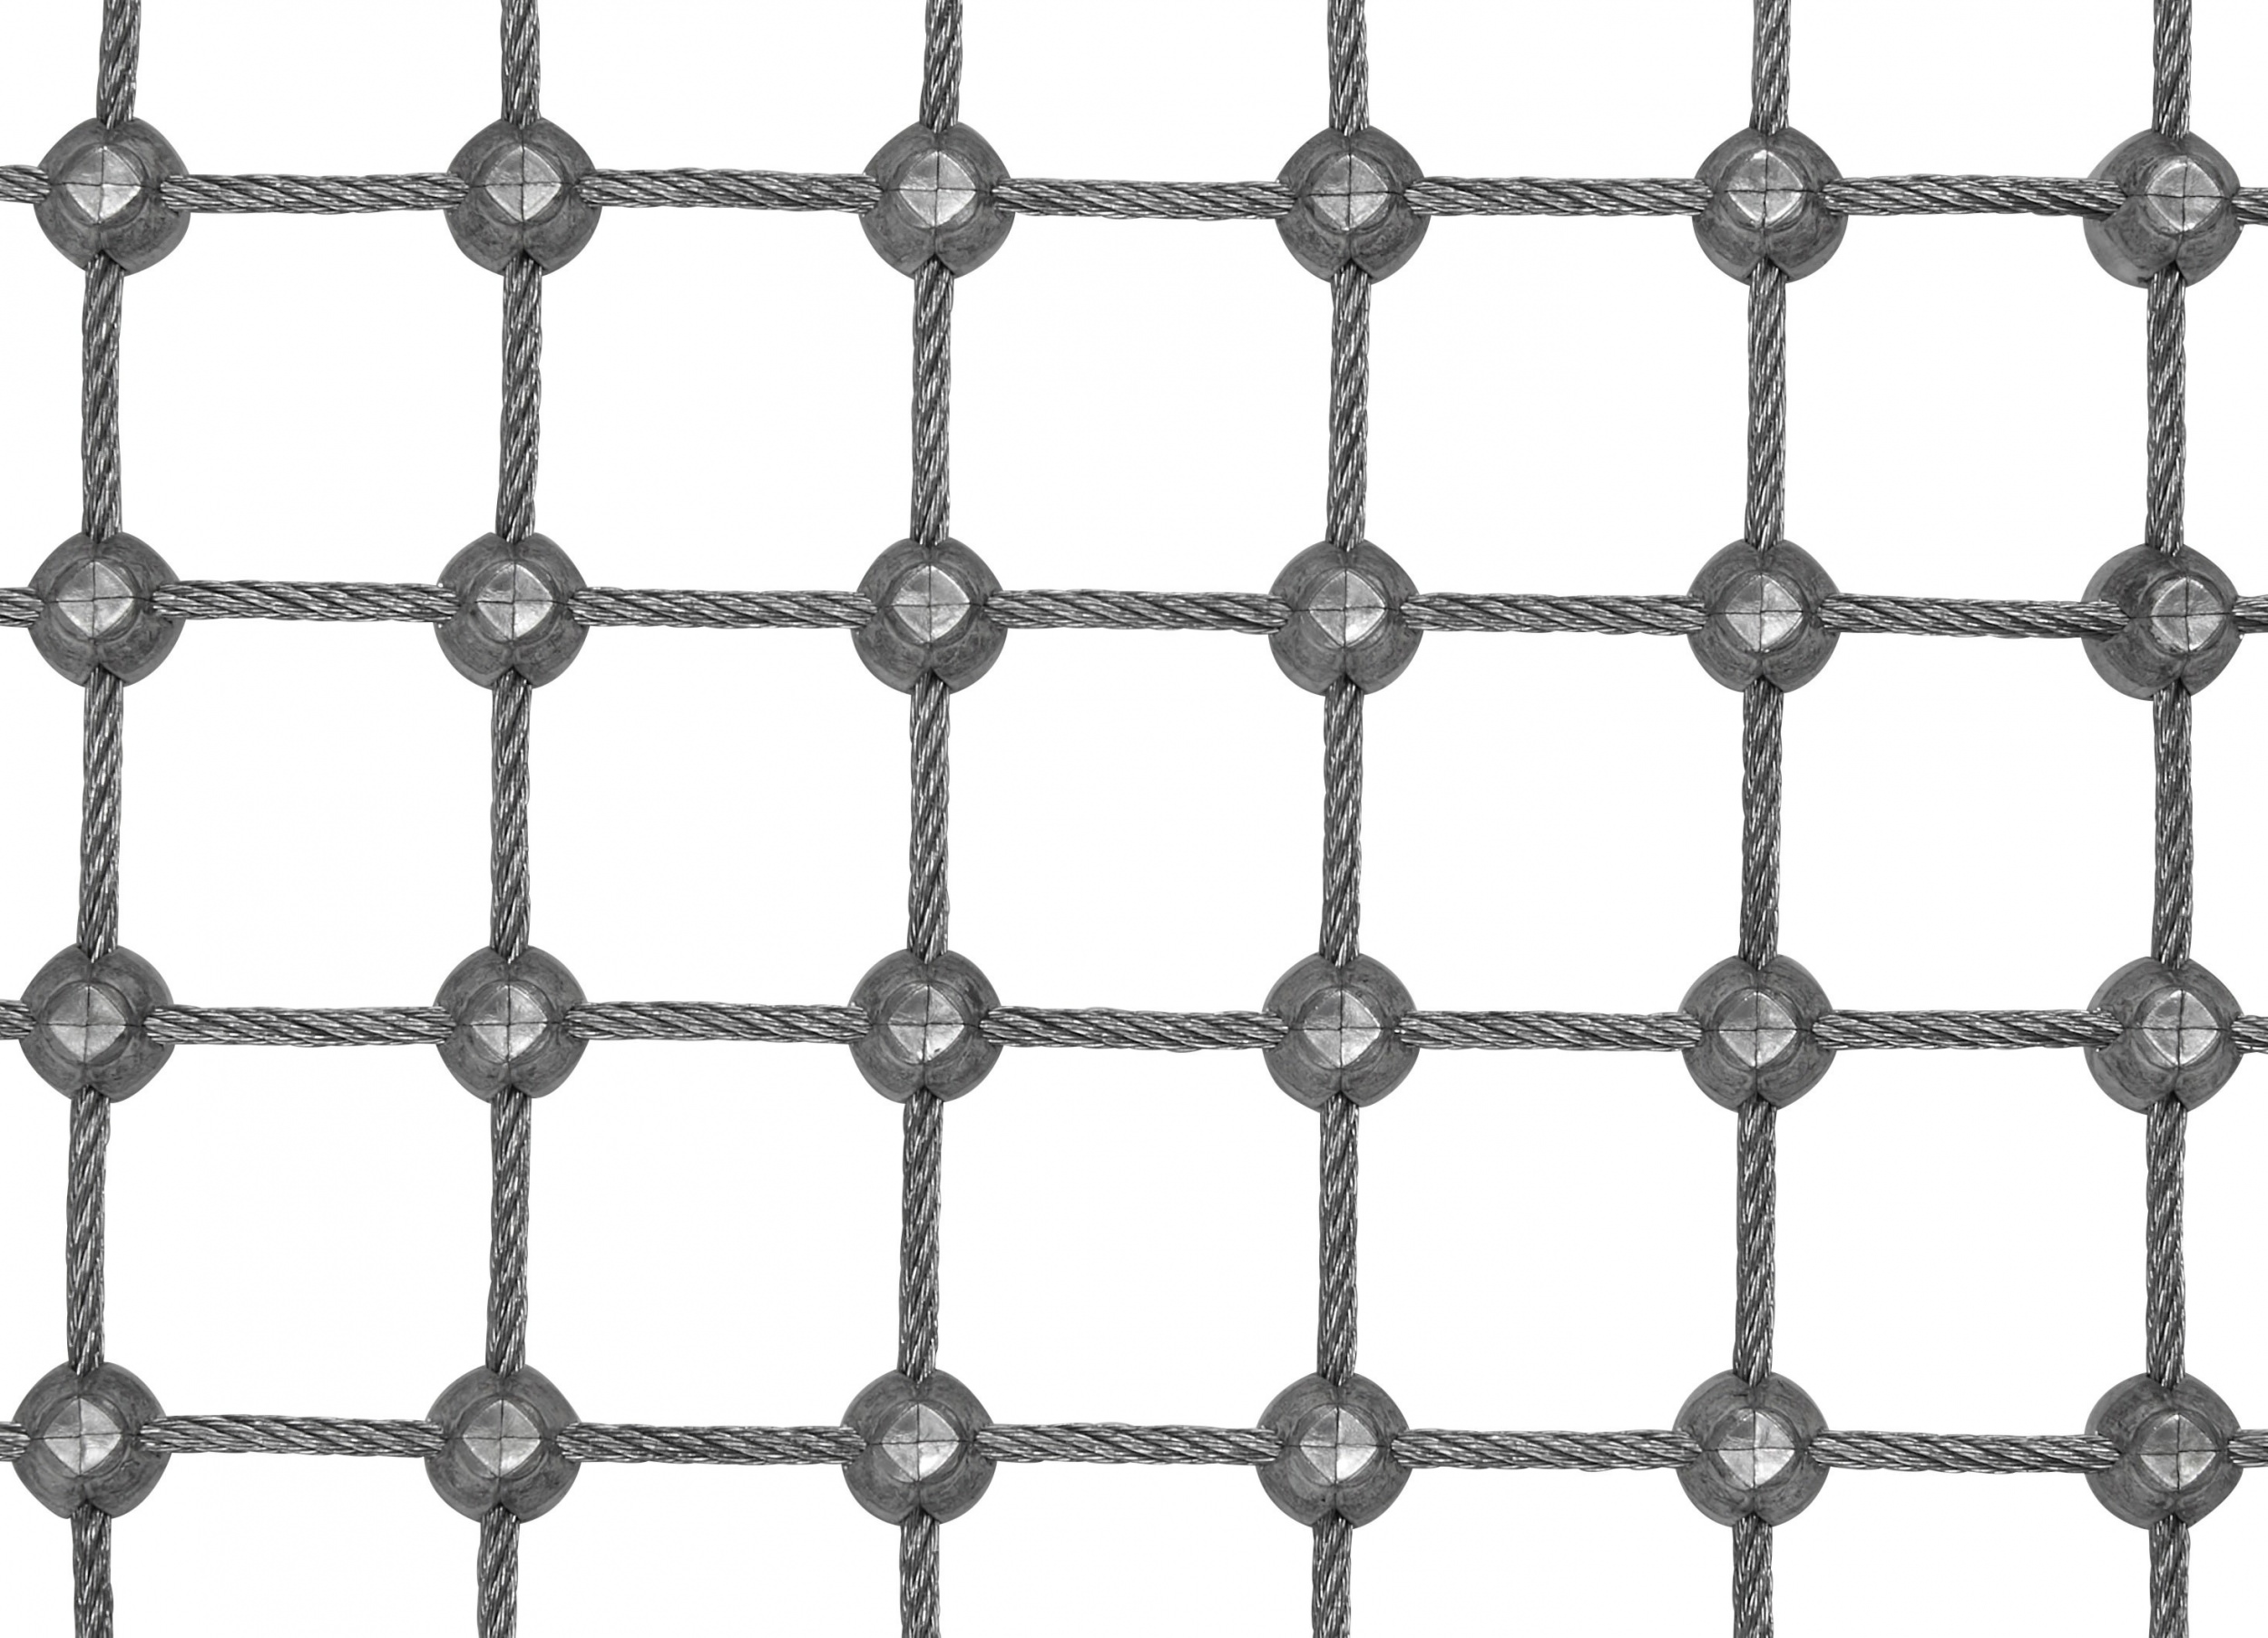 Stainless Steel Wire Rope Net (2.5 mm/25 mm)